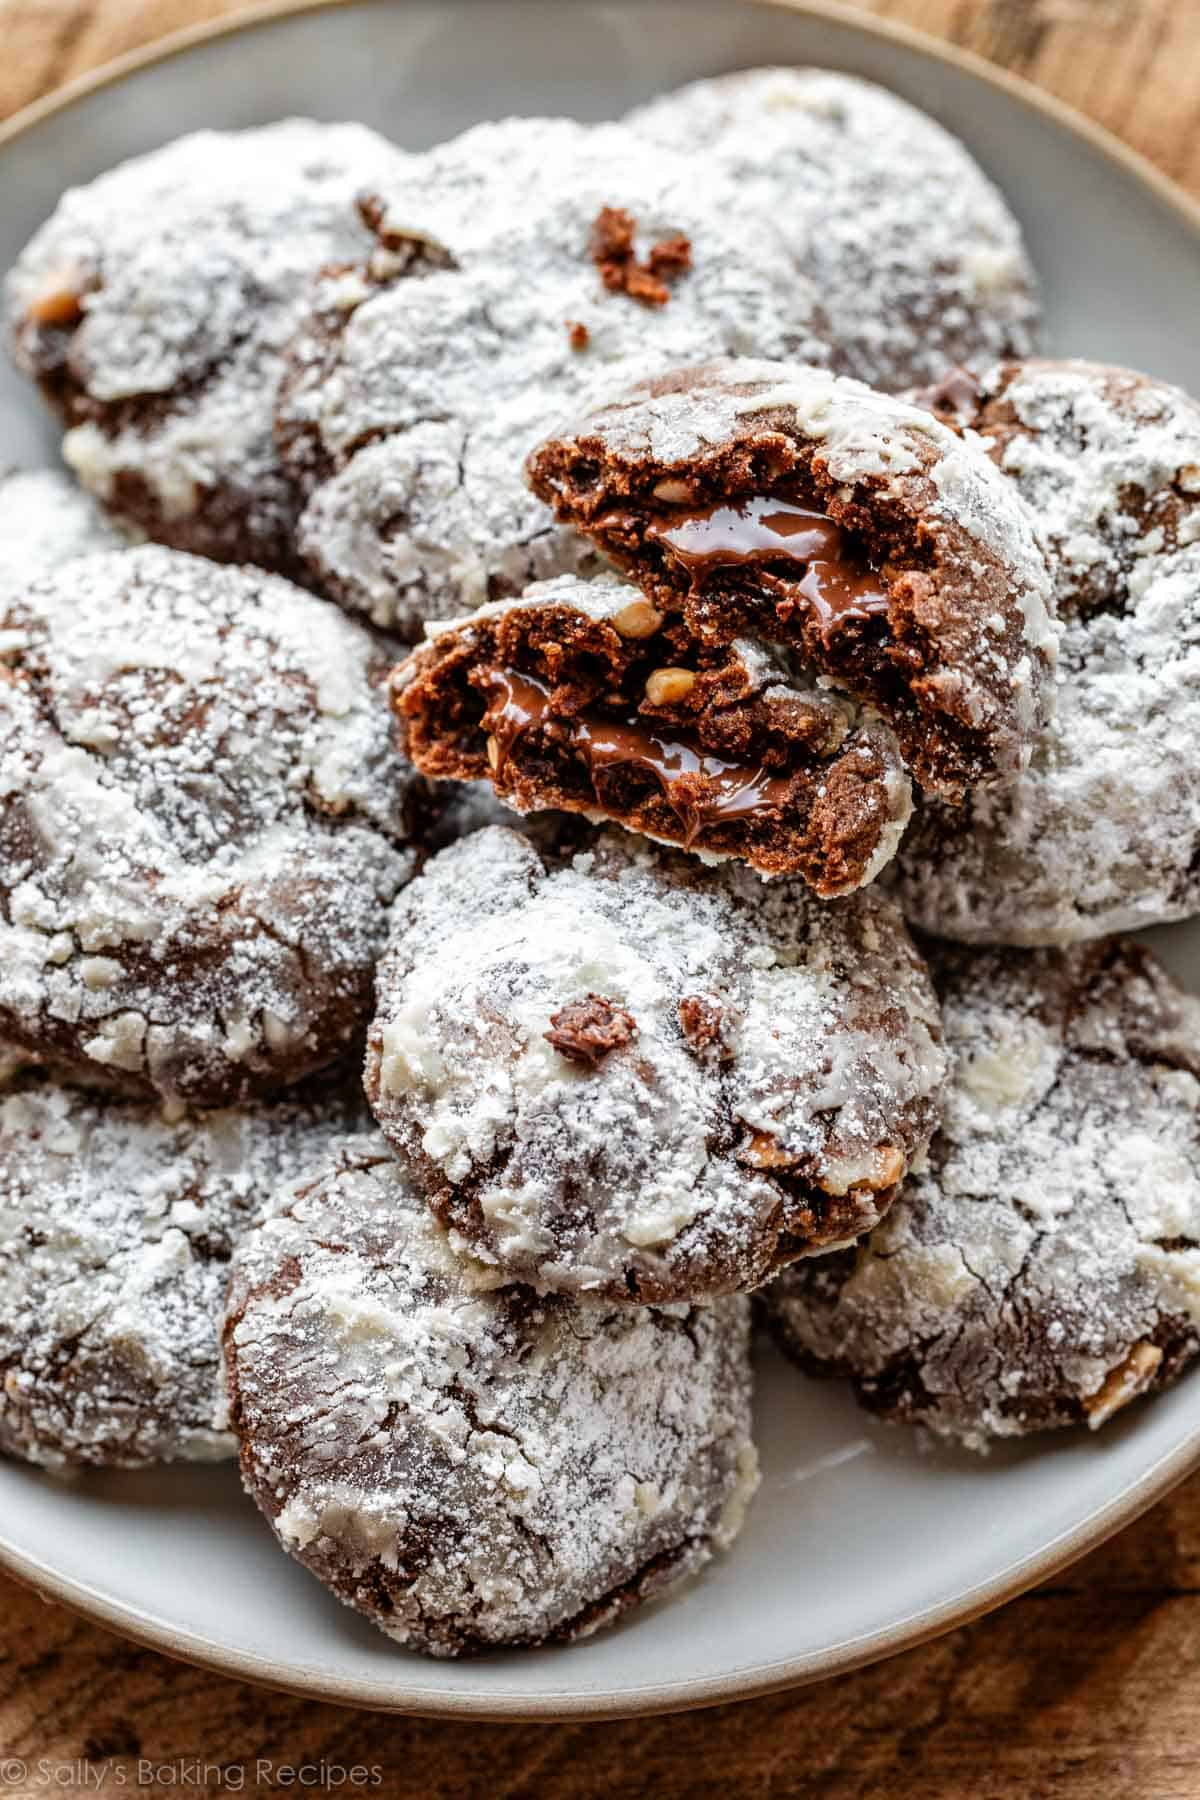 Nutella crinkles on white plate with 1 cookie broken in half to show Nutella in the center.